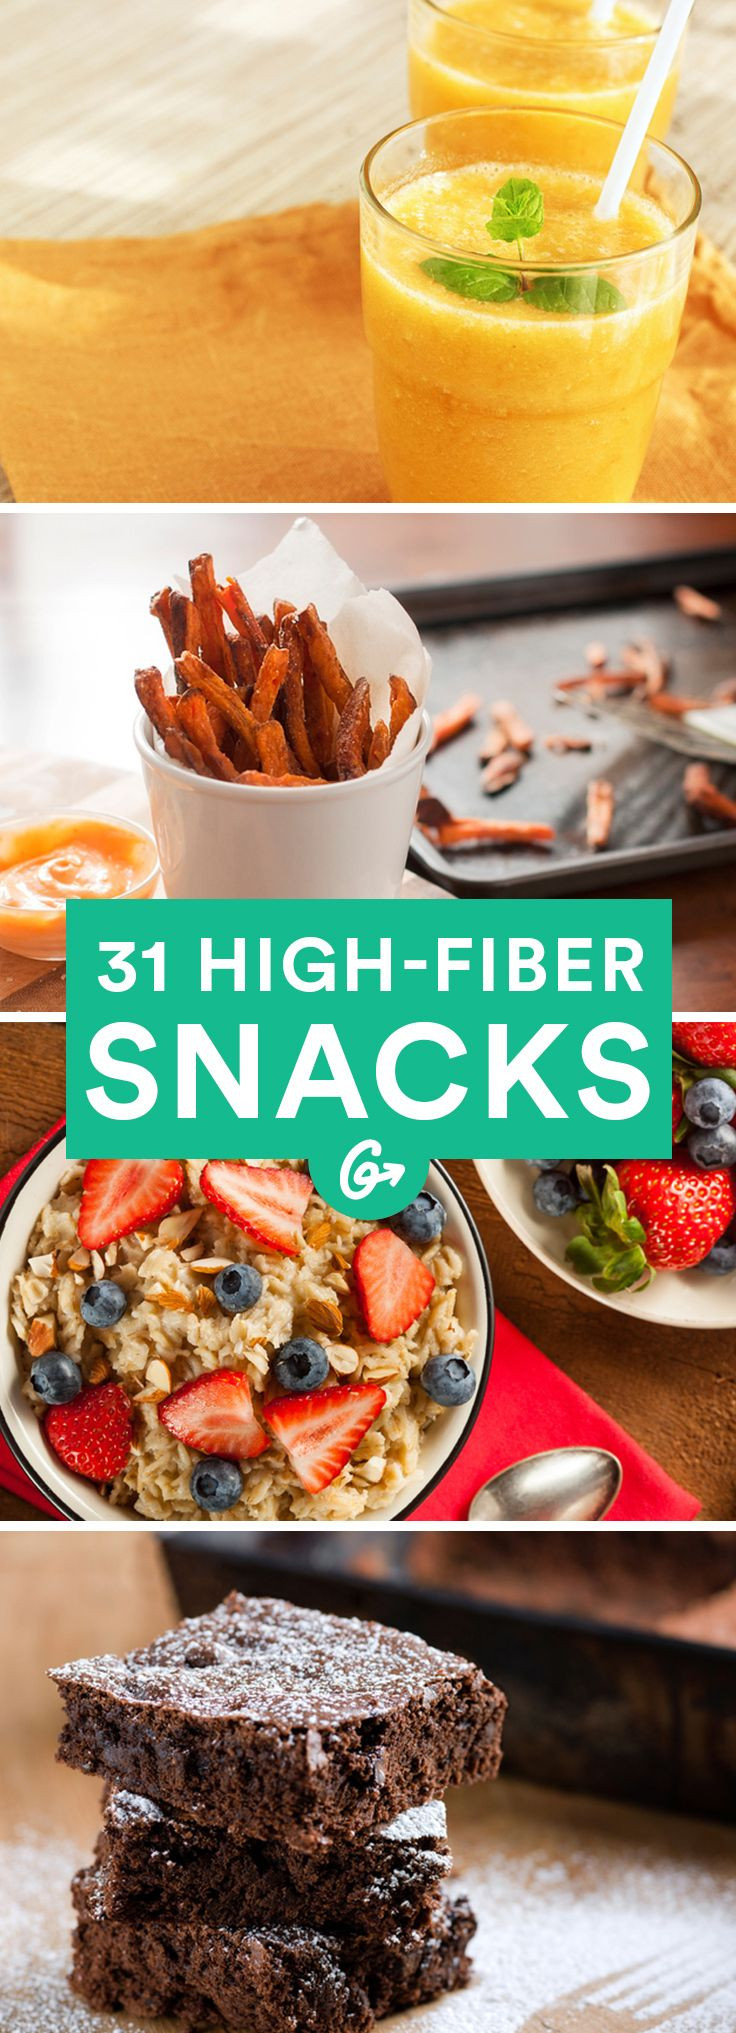 Healthy Fiber Snacks
 31 High Fiber Snacks You Need to Add to Your Diet